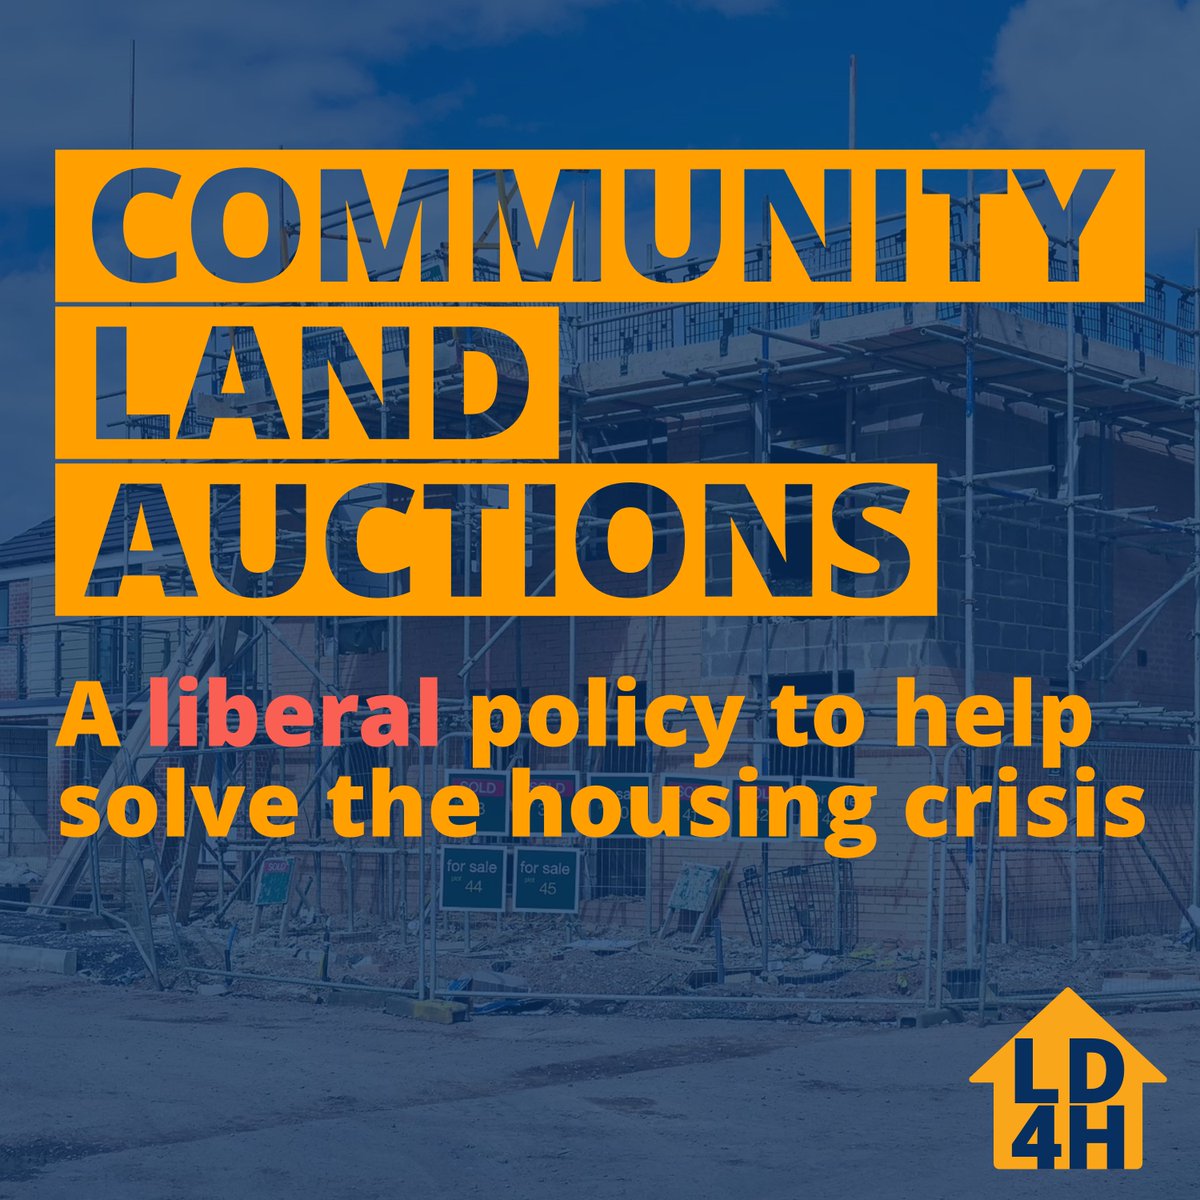 Let’s give Community Land Auctions a go - @EdwardJDavey helped introduce the idea years ago and we finally have a chance to make them a reality! libhousing.com/community-land…